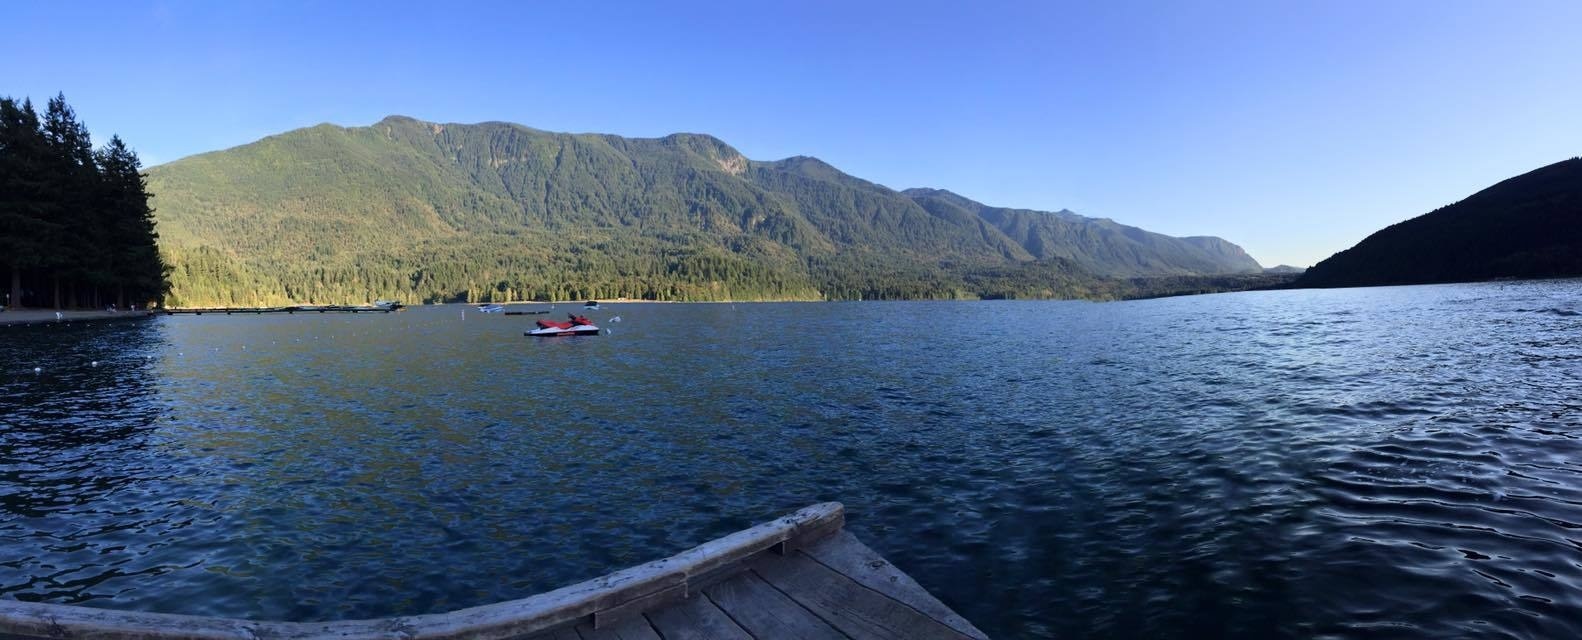 Spent a summer evening at Cultus Lake watching the locals enjoy the water. #LifeAtExpediaGroup